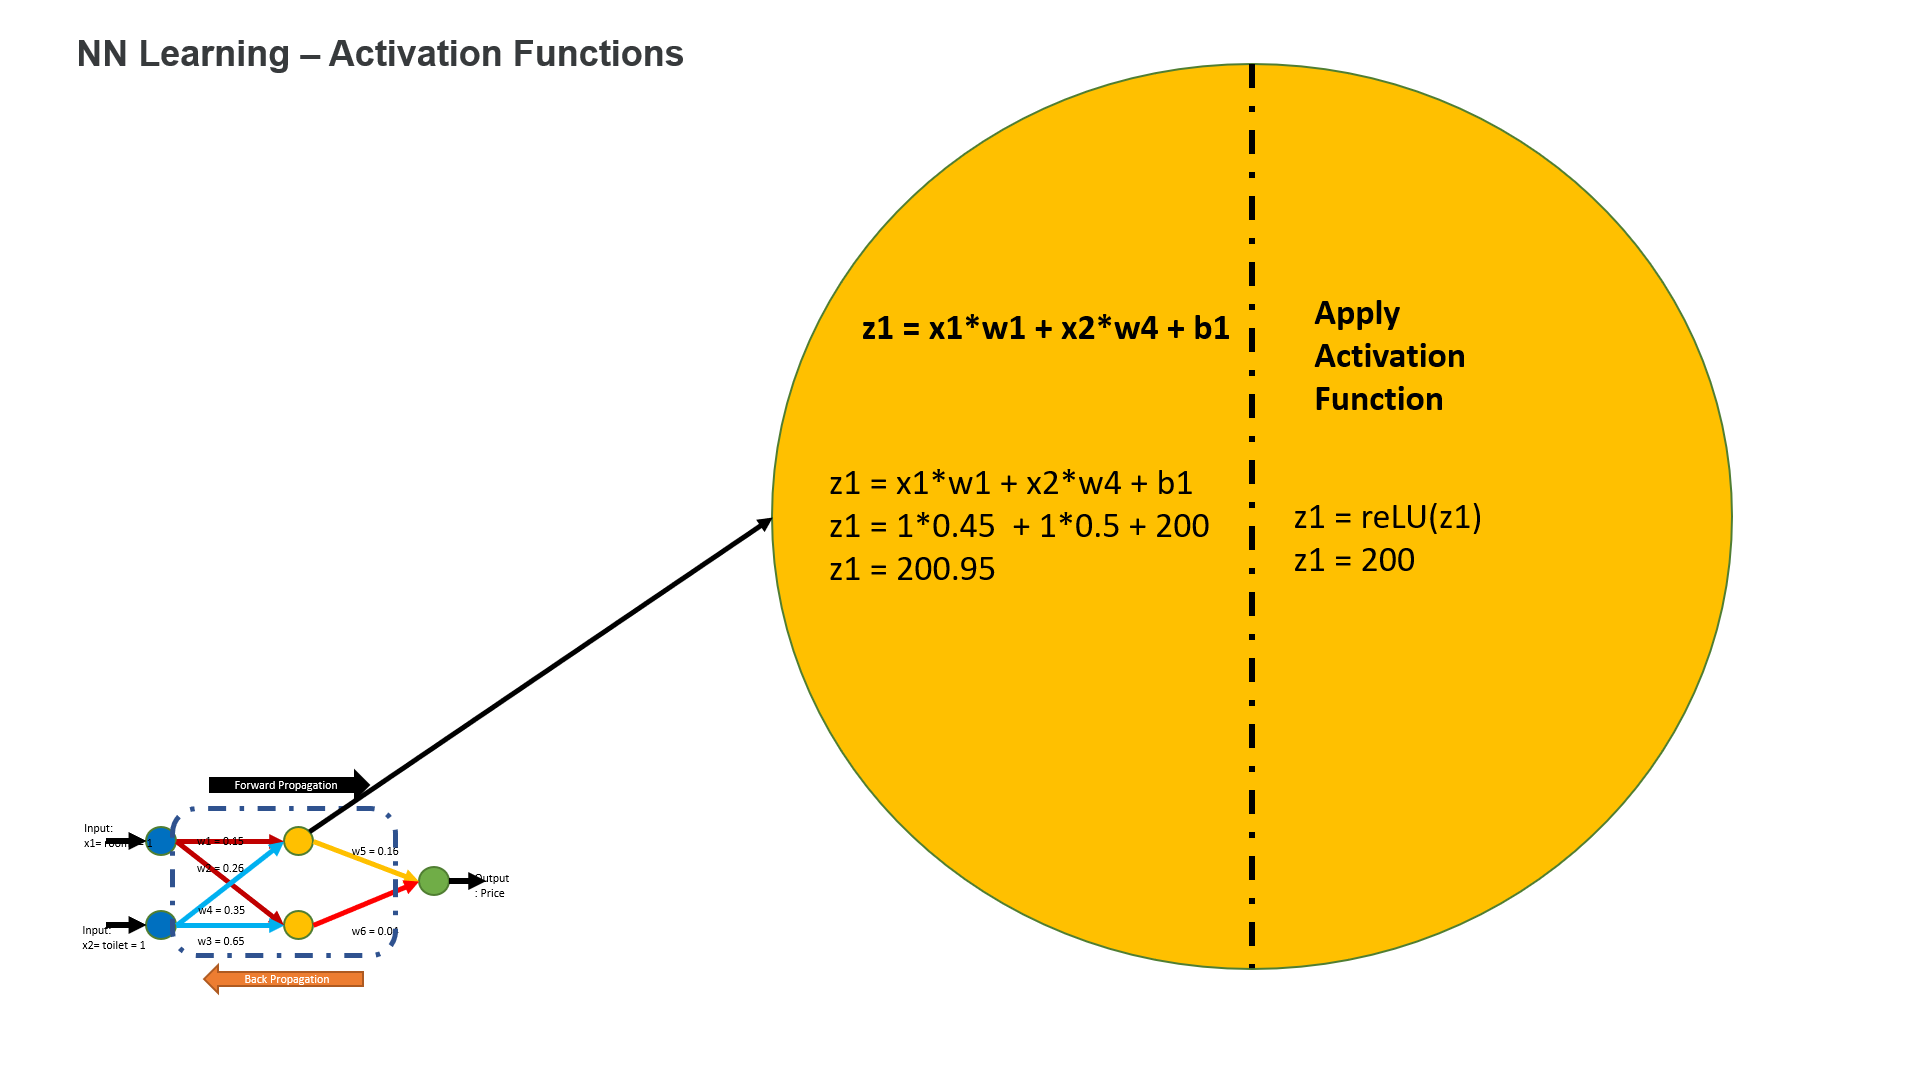 ANN Activation Functions